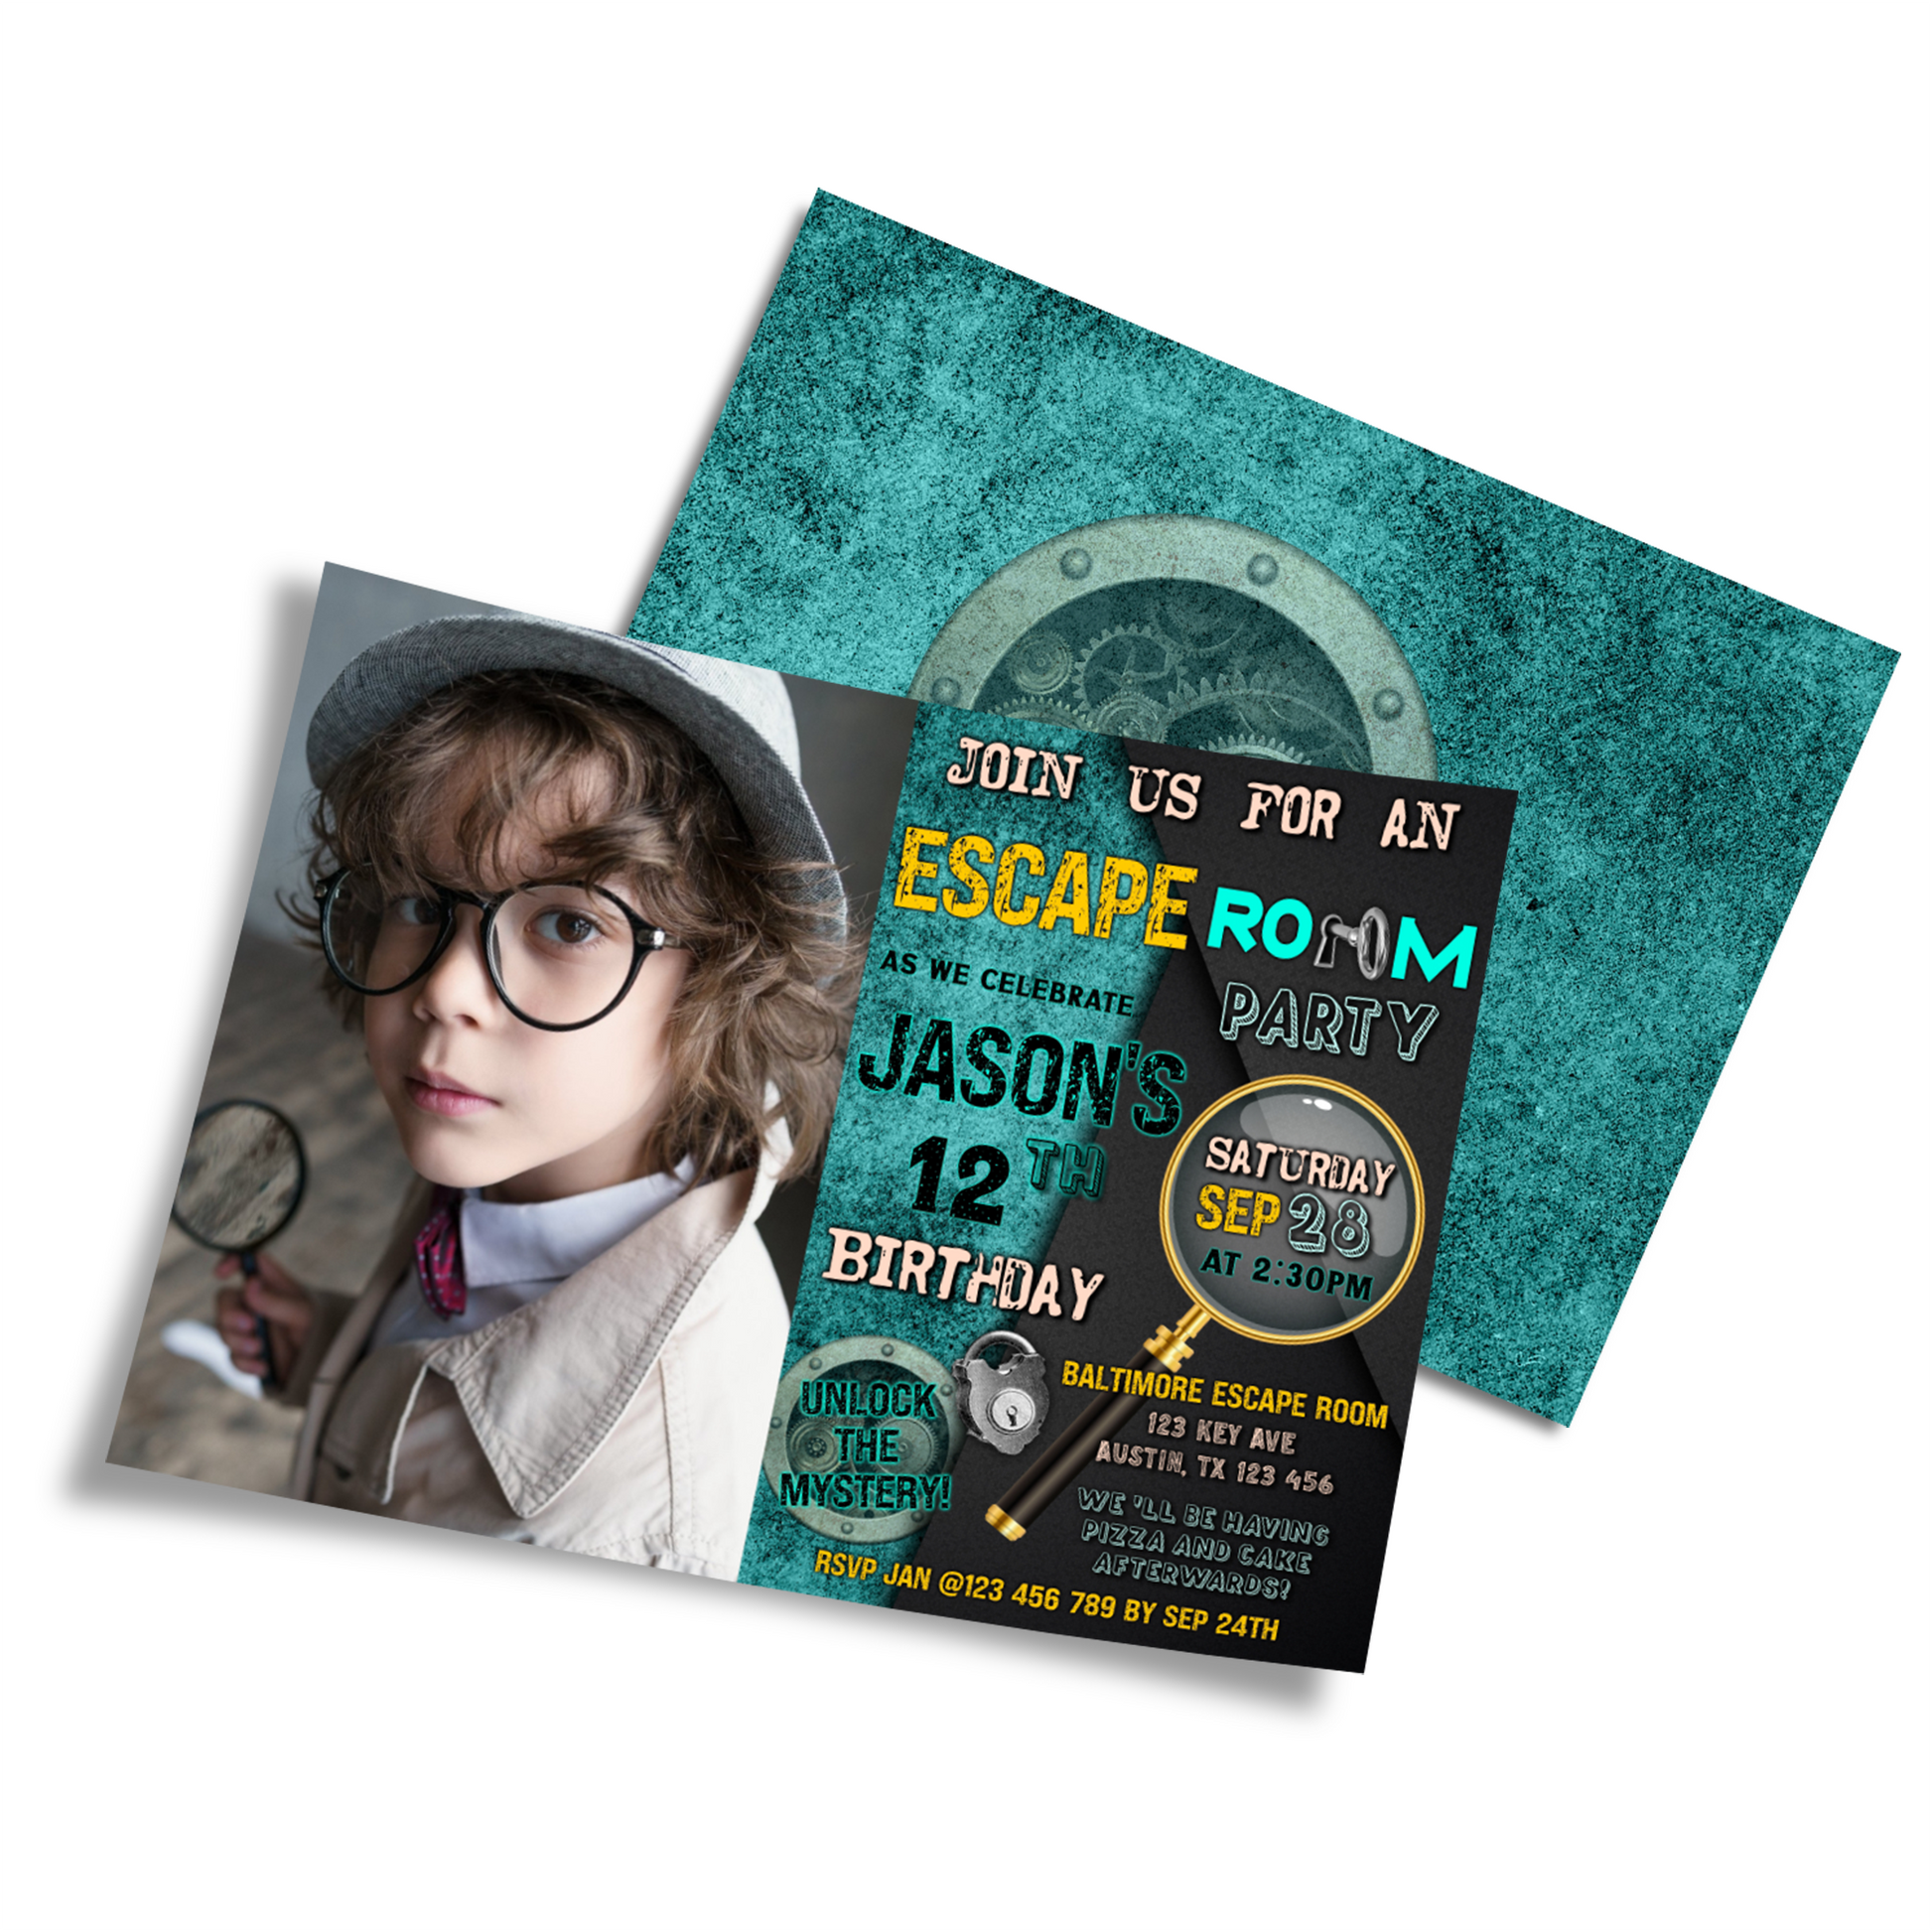 Personalized photo card invitations with an Escape Room theme